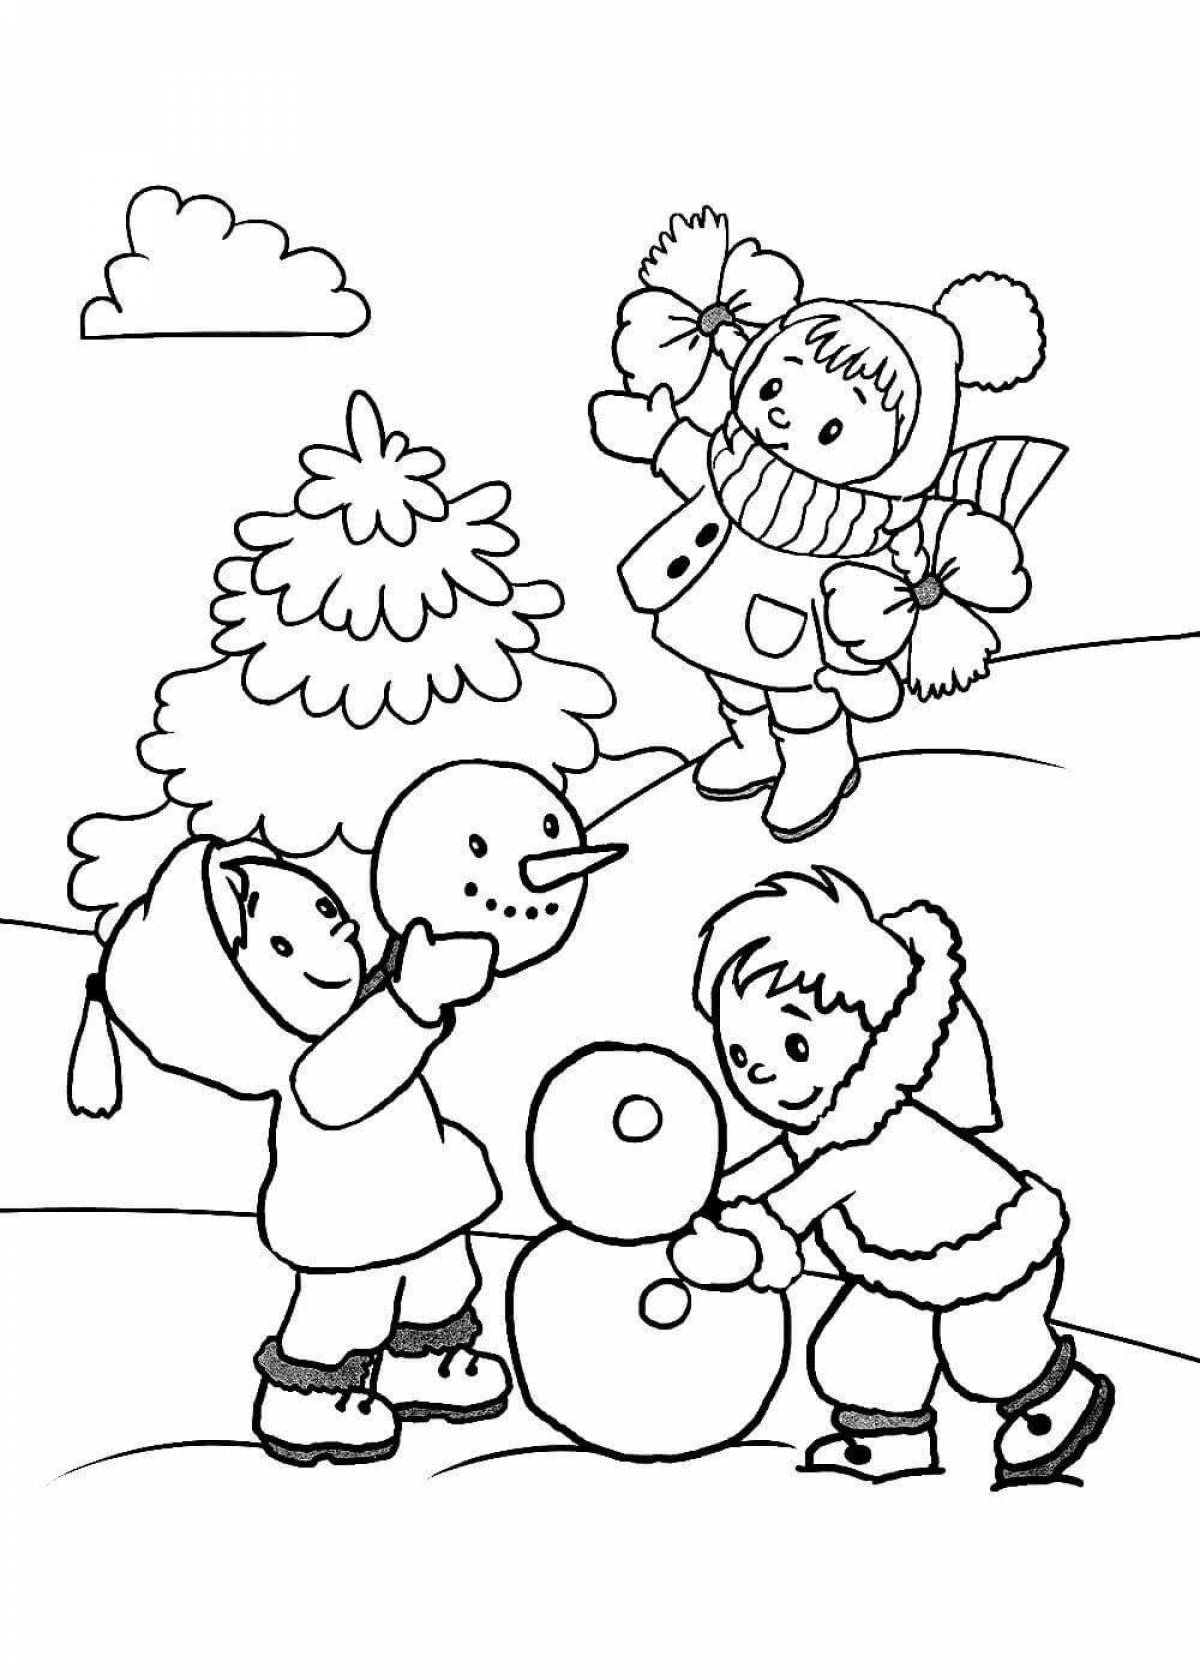 Colourful coloring winter activities for children 6 years old